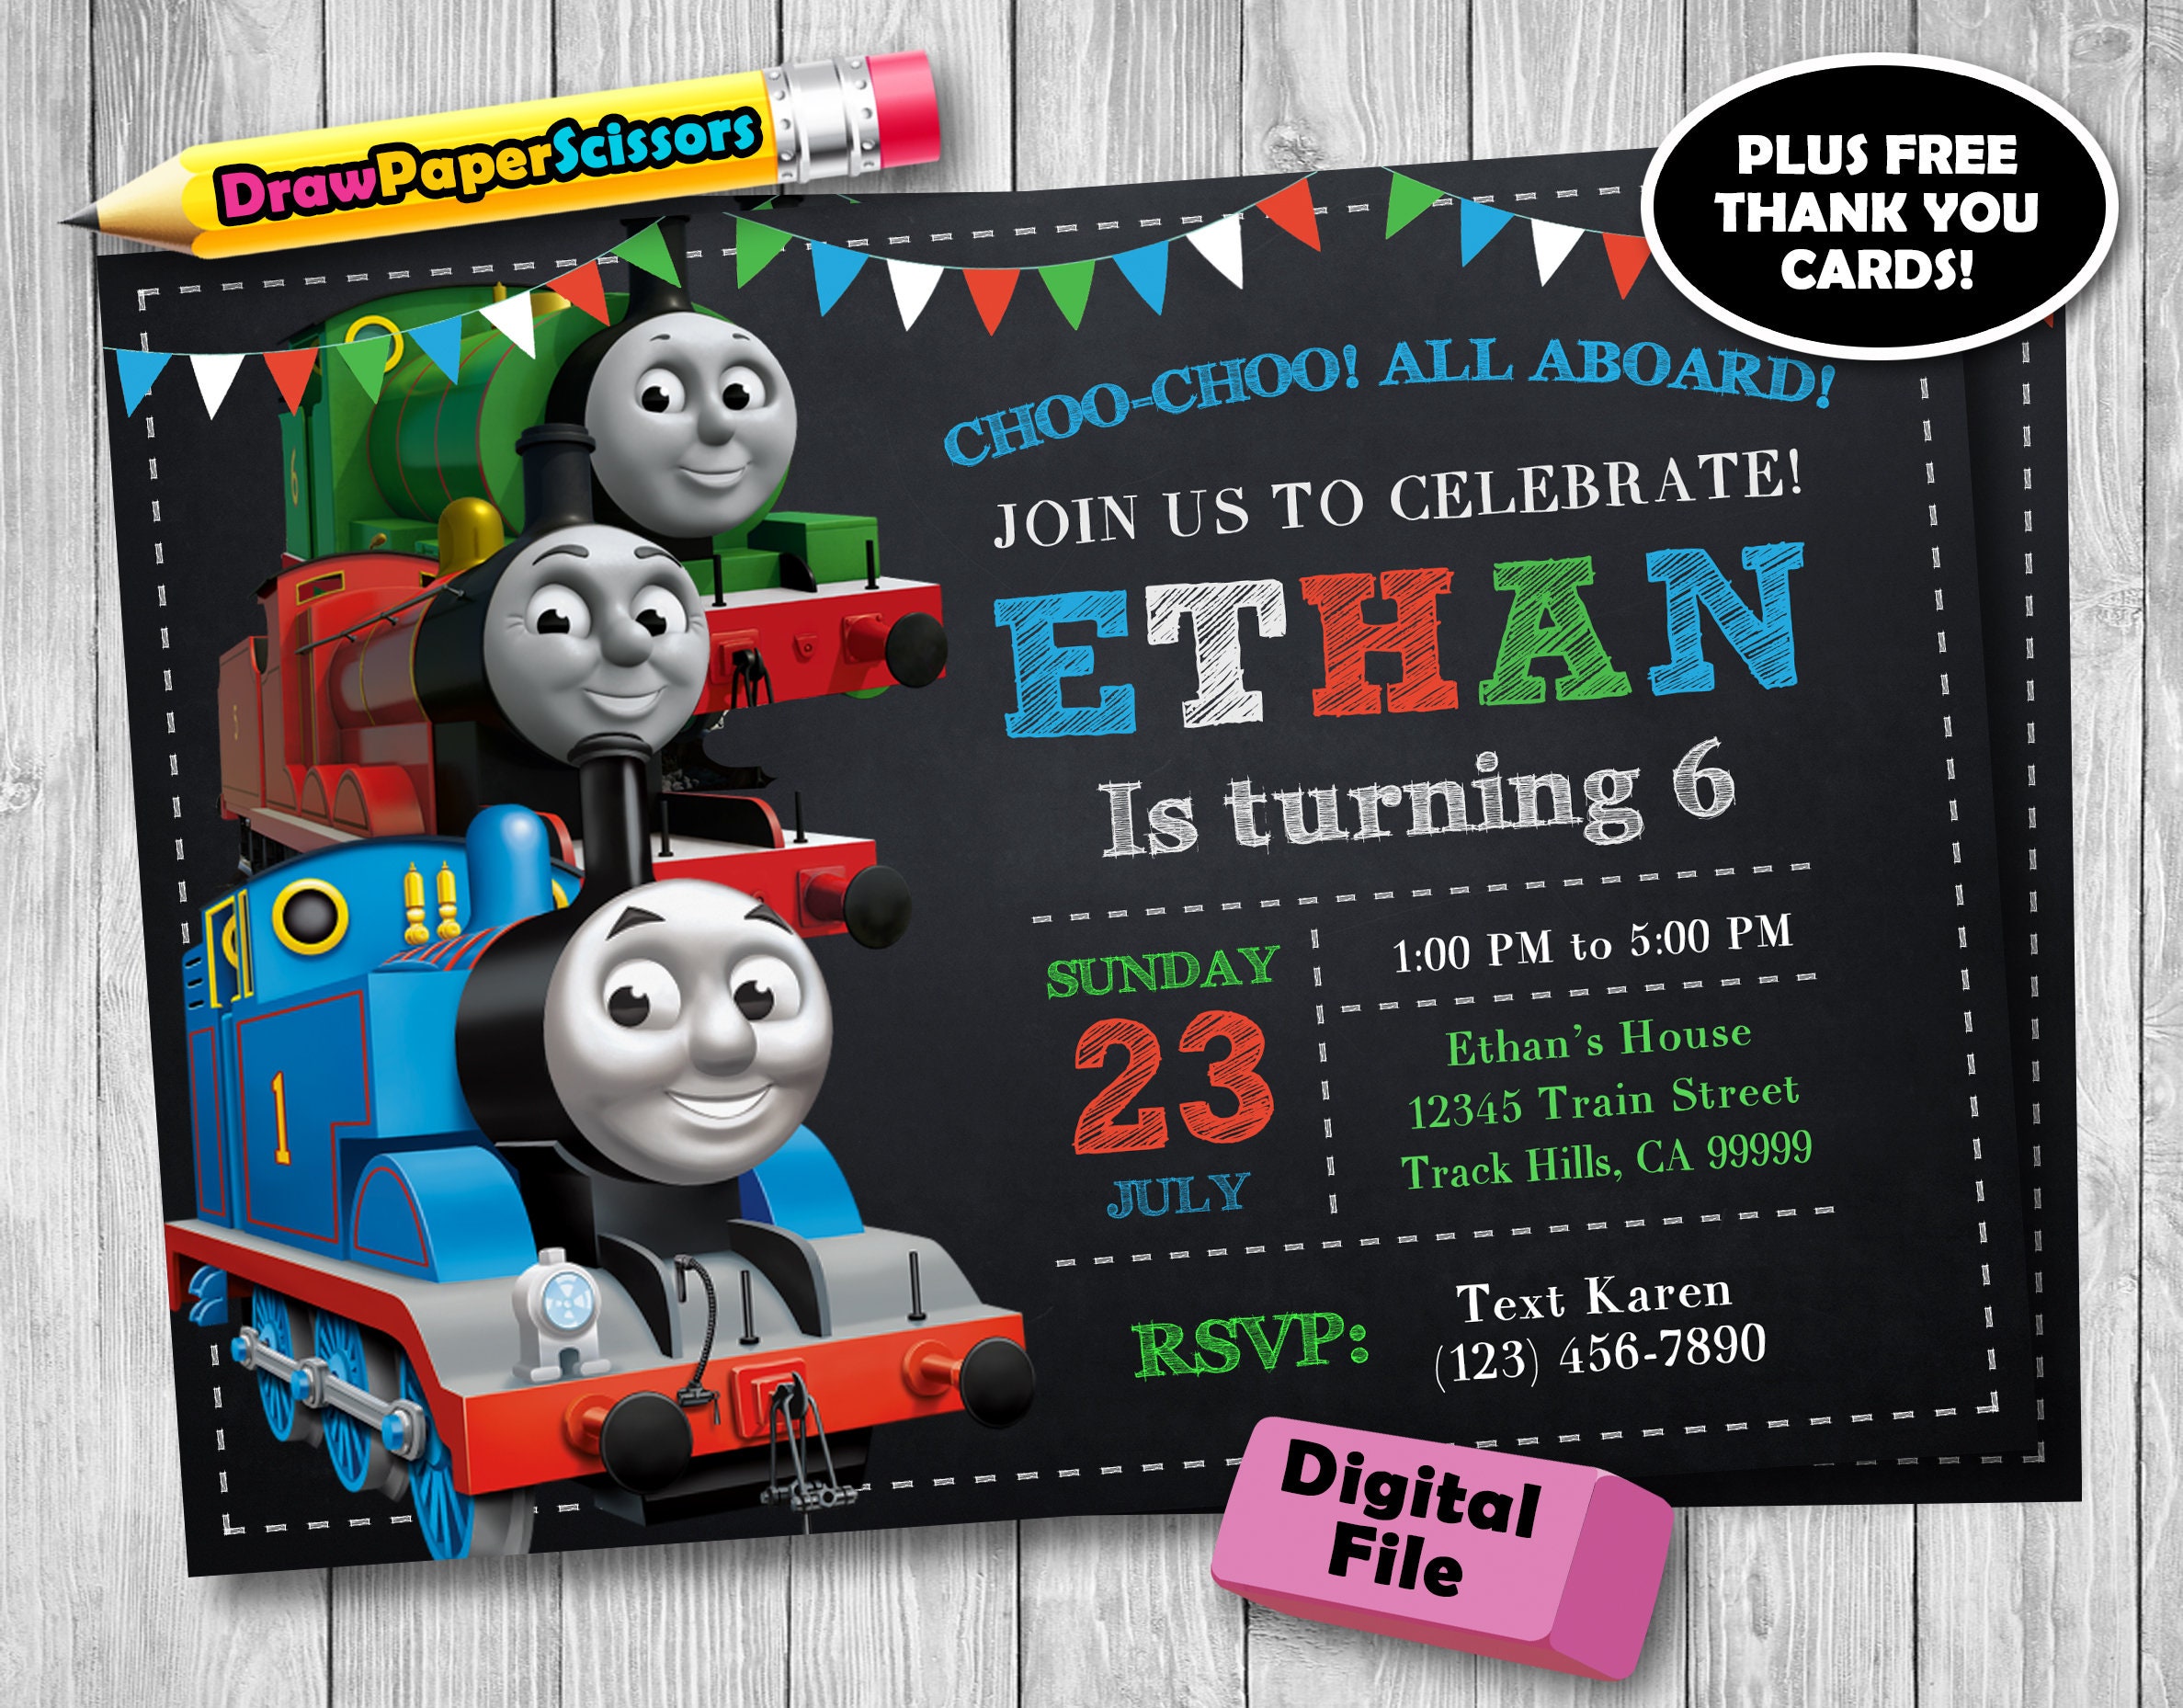 somersault-memo-dramatic-thomas-and-friends-birthday-card-insignificant